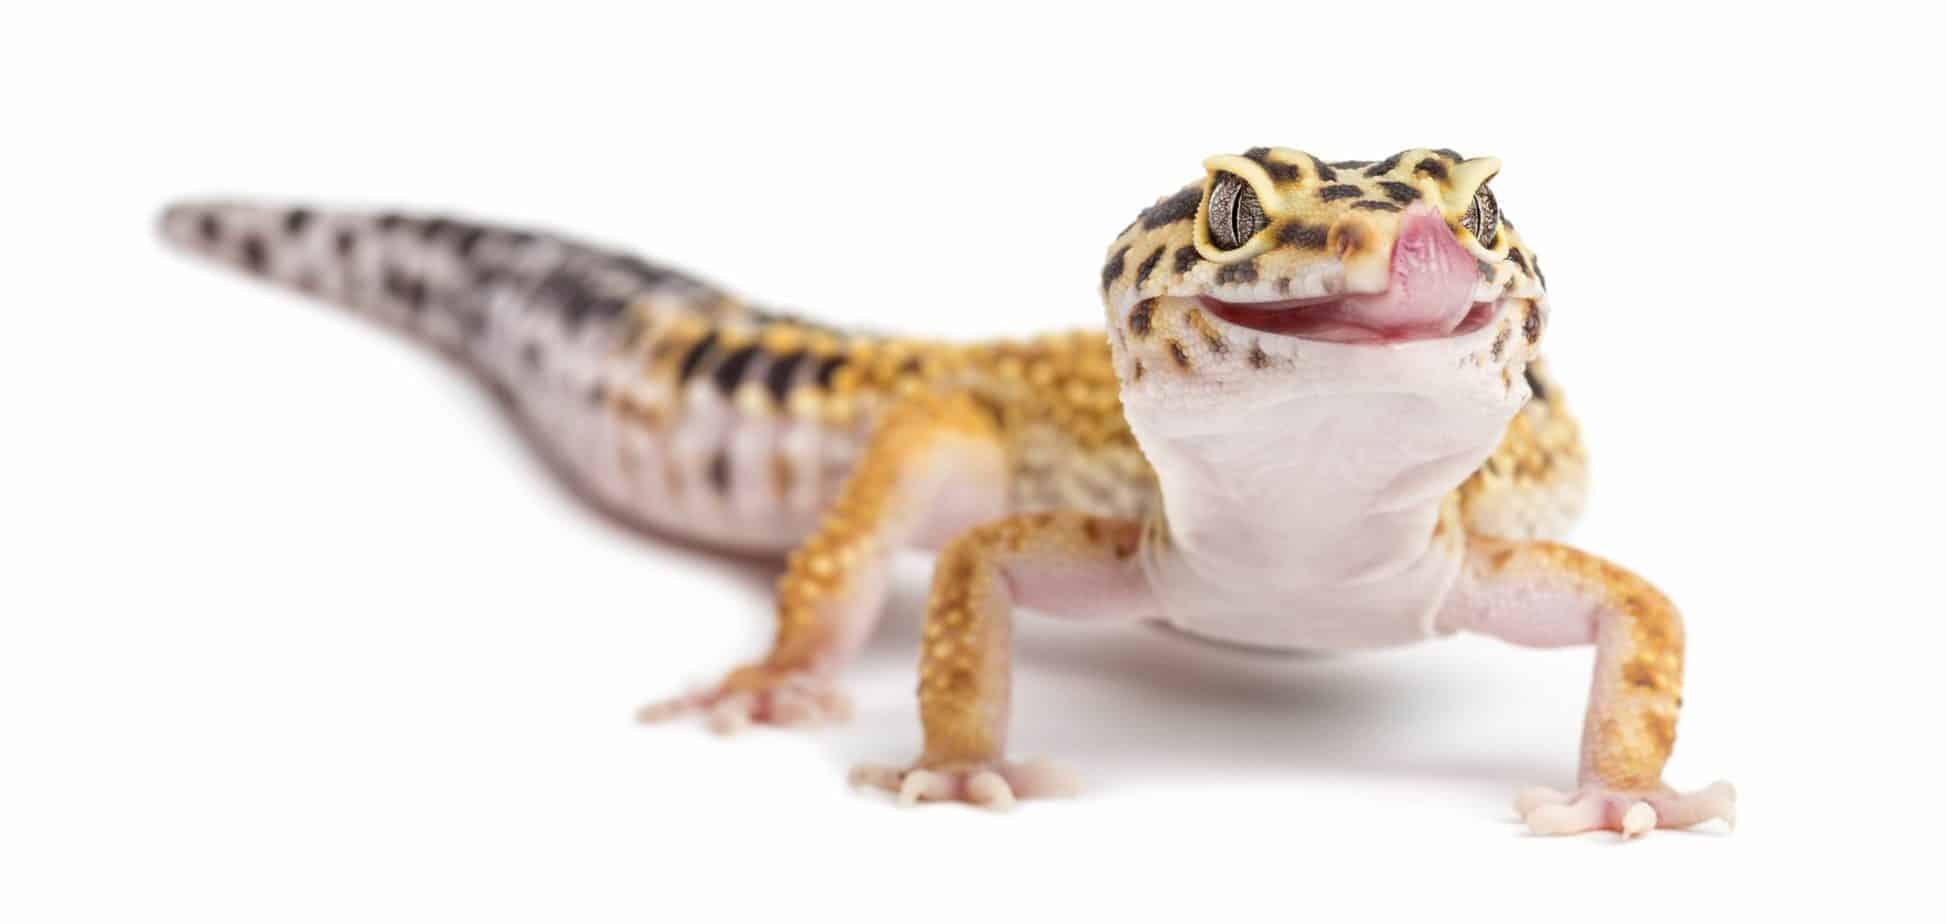 are little lizards bad for dogs